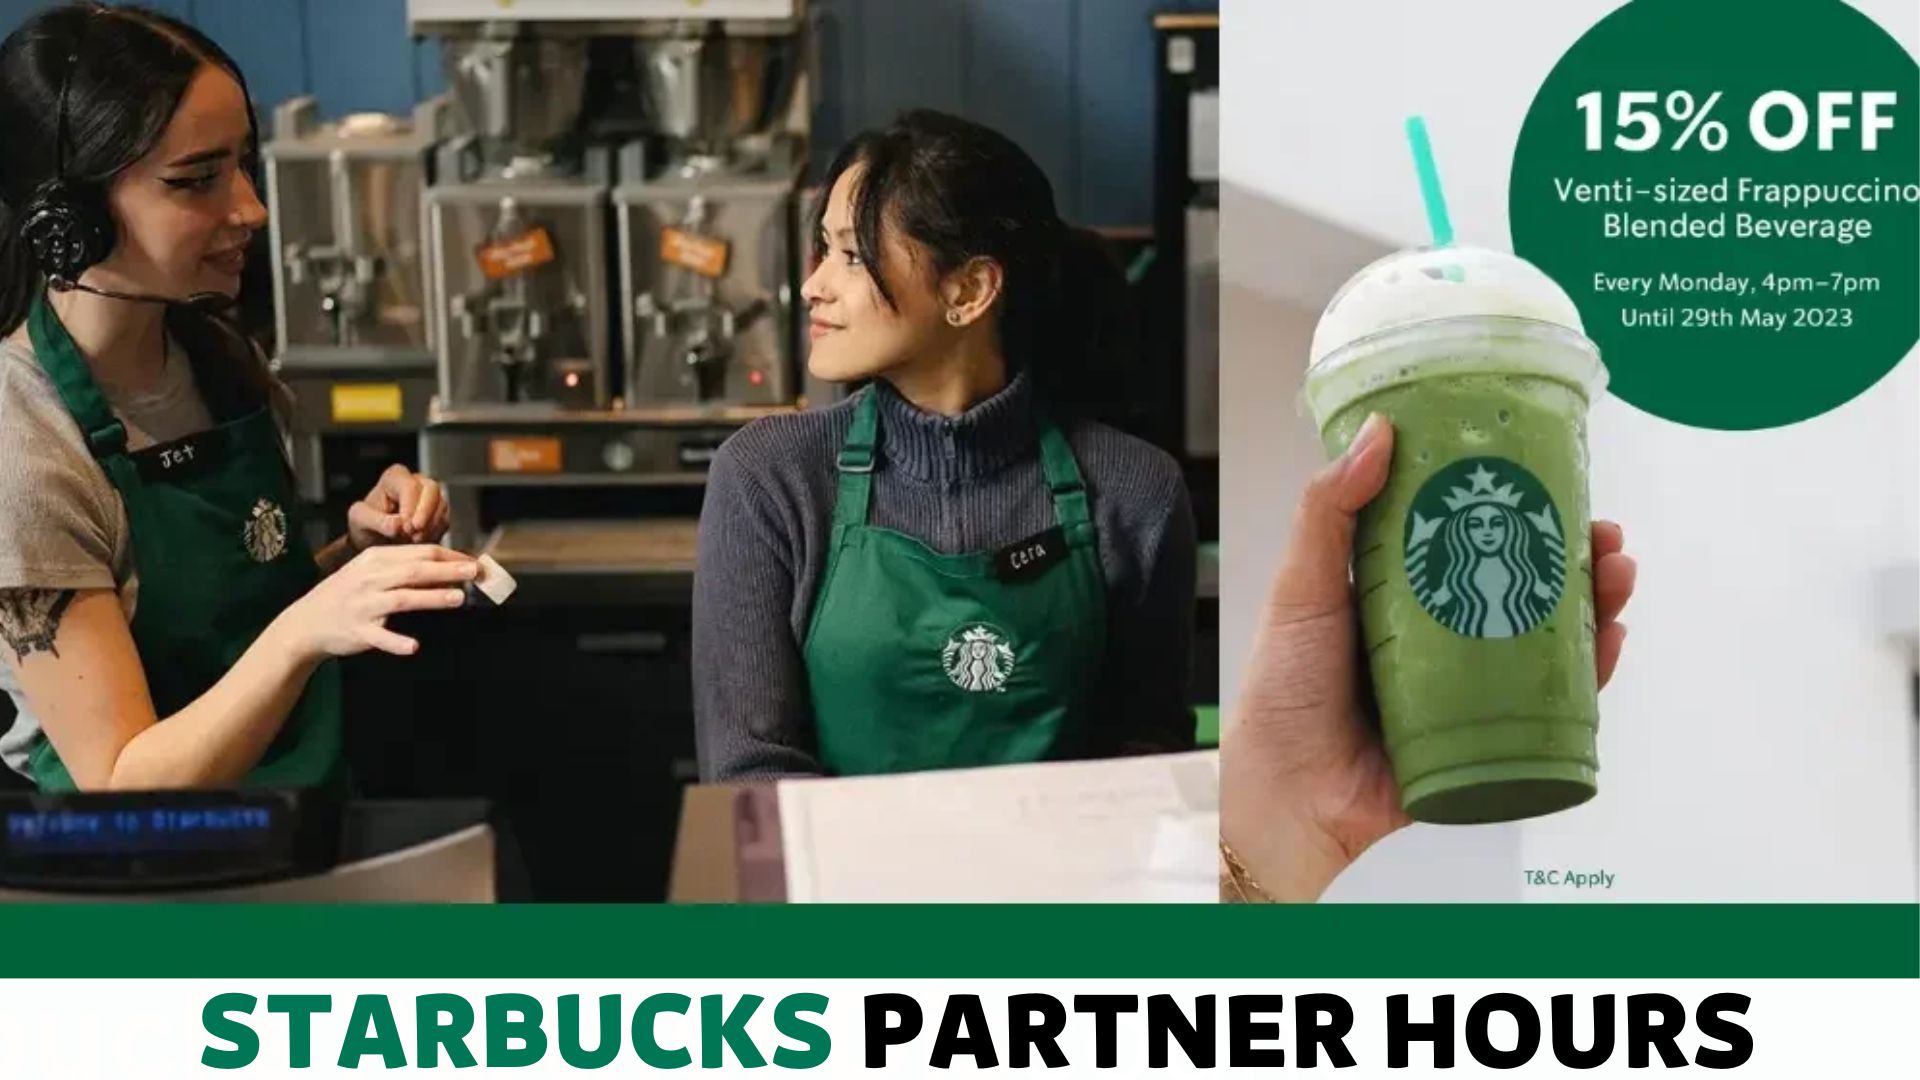 What is the Starbucks Partner Discount